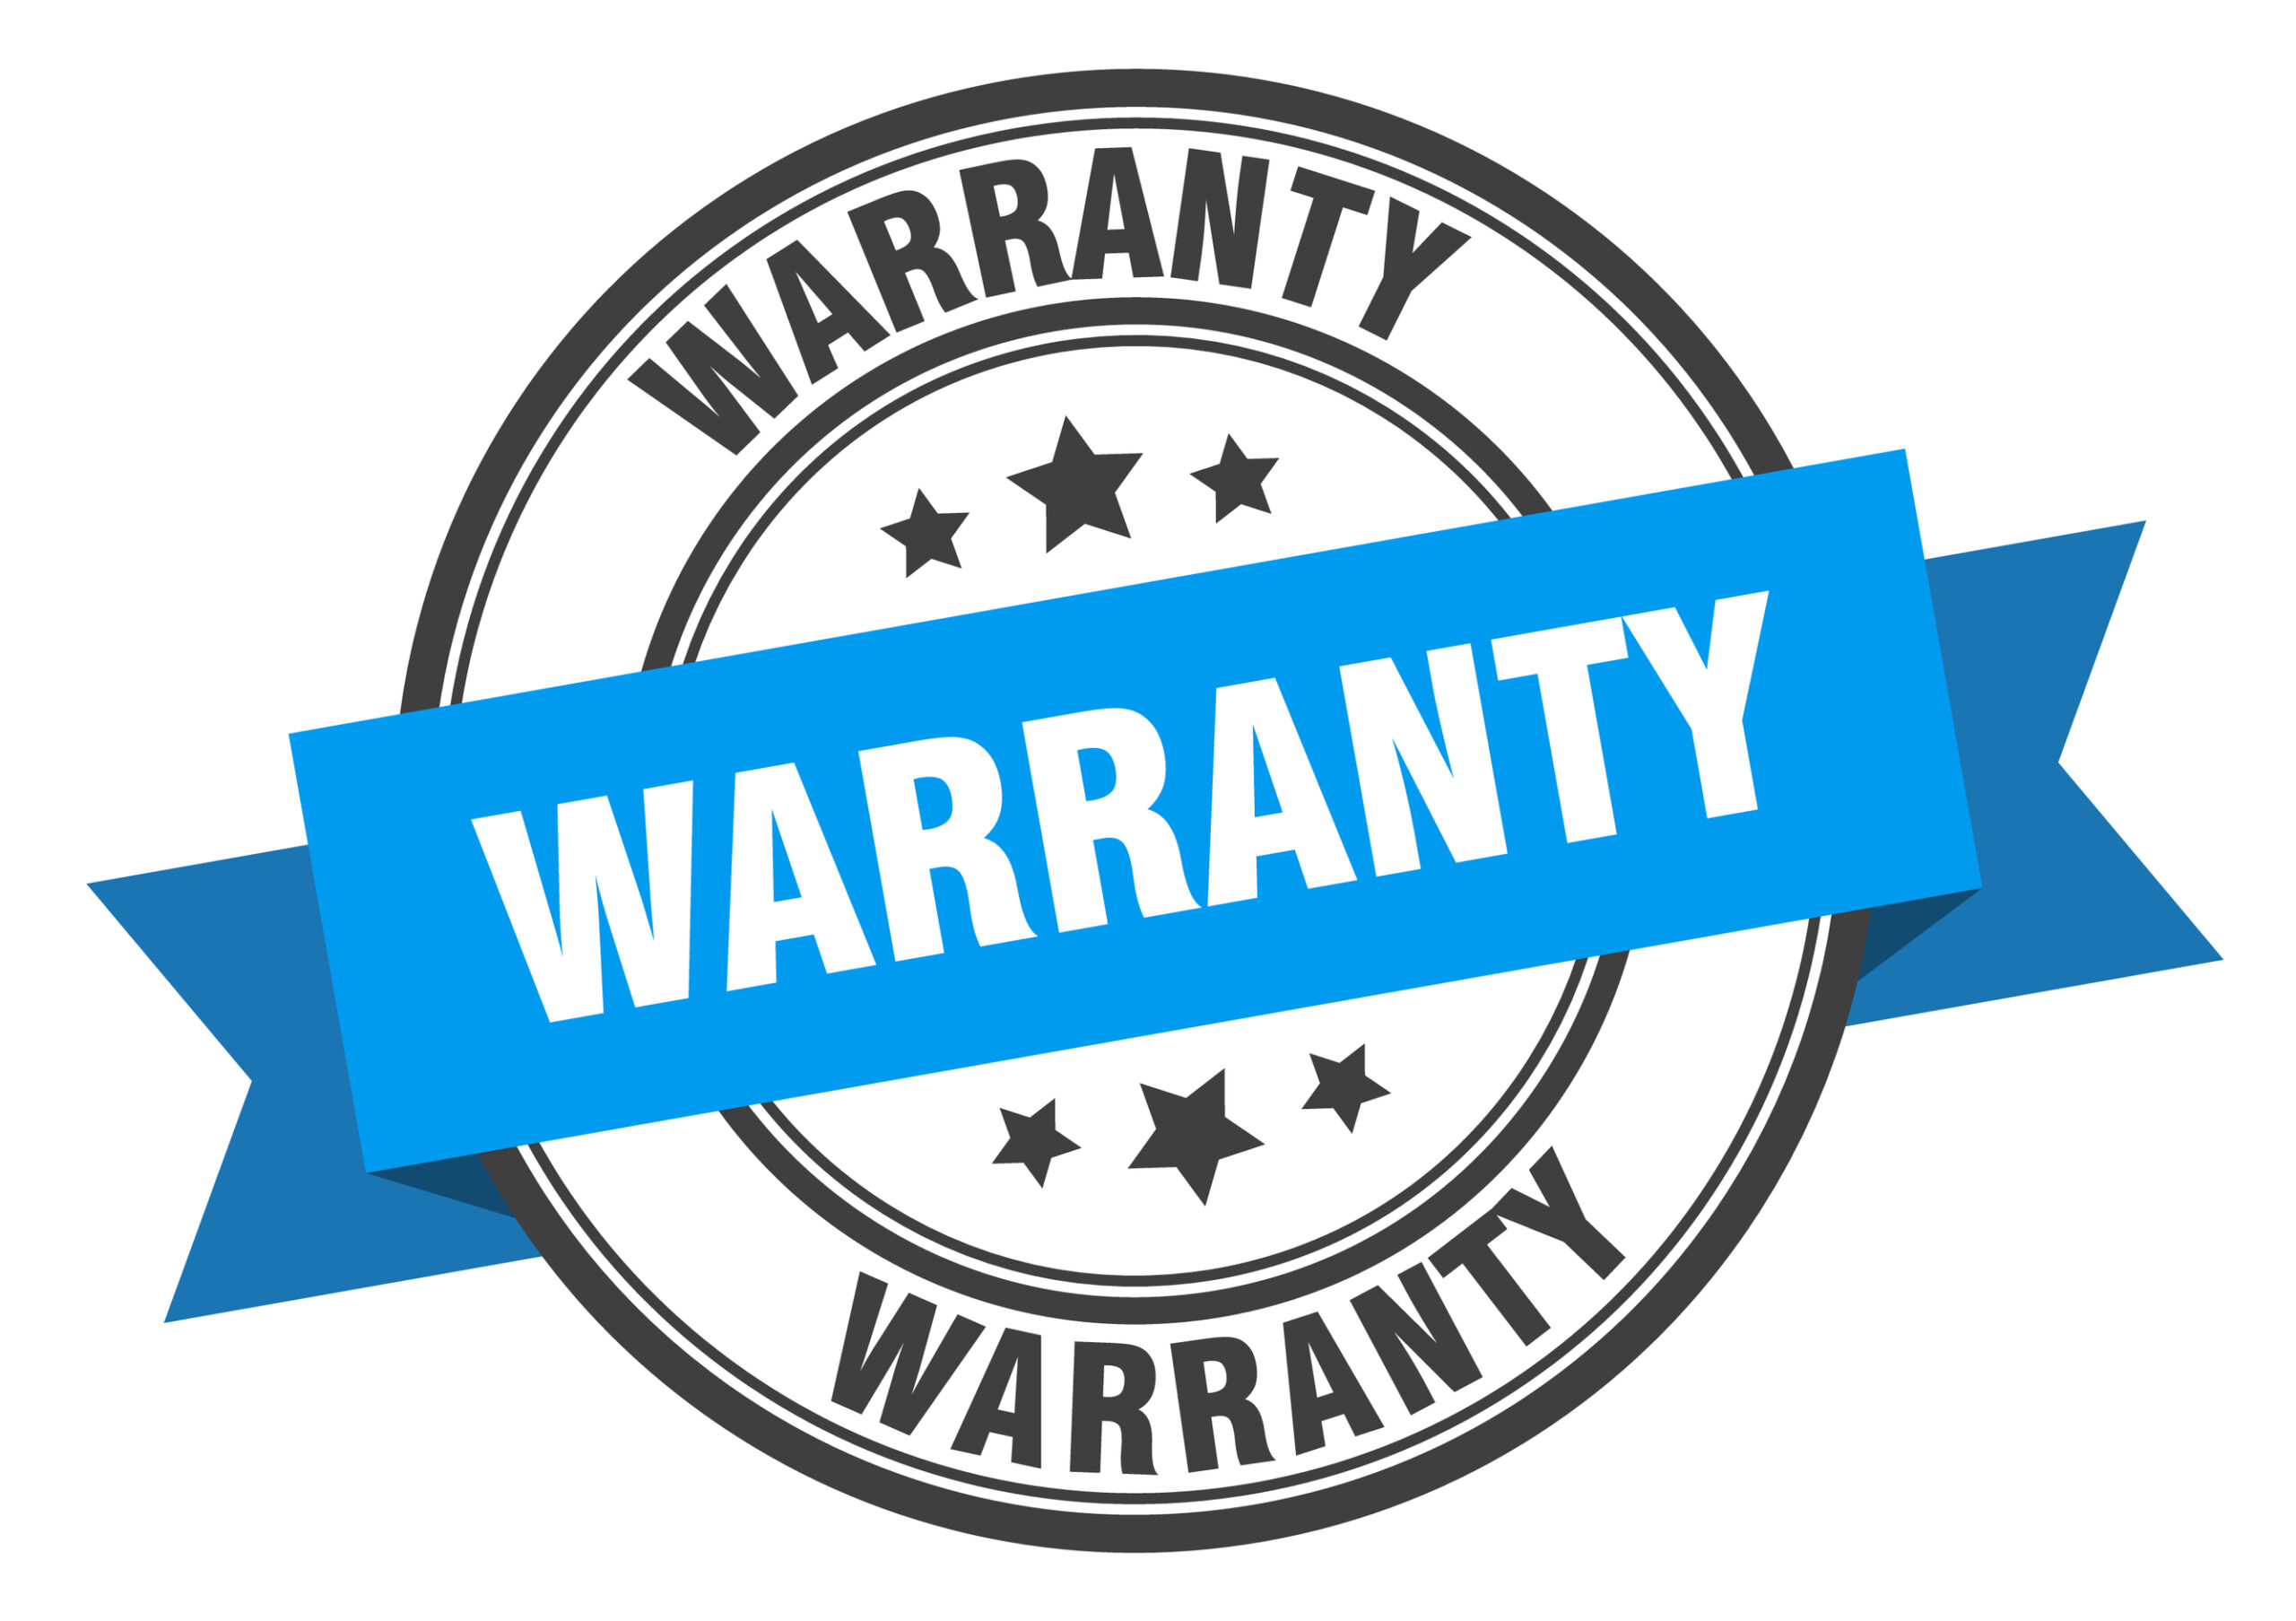 2. Why It’s Important to Review Your Roofing Warranty Options